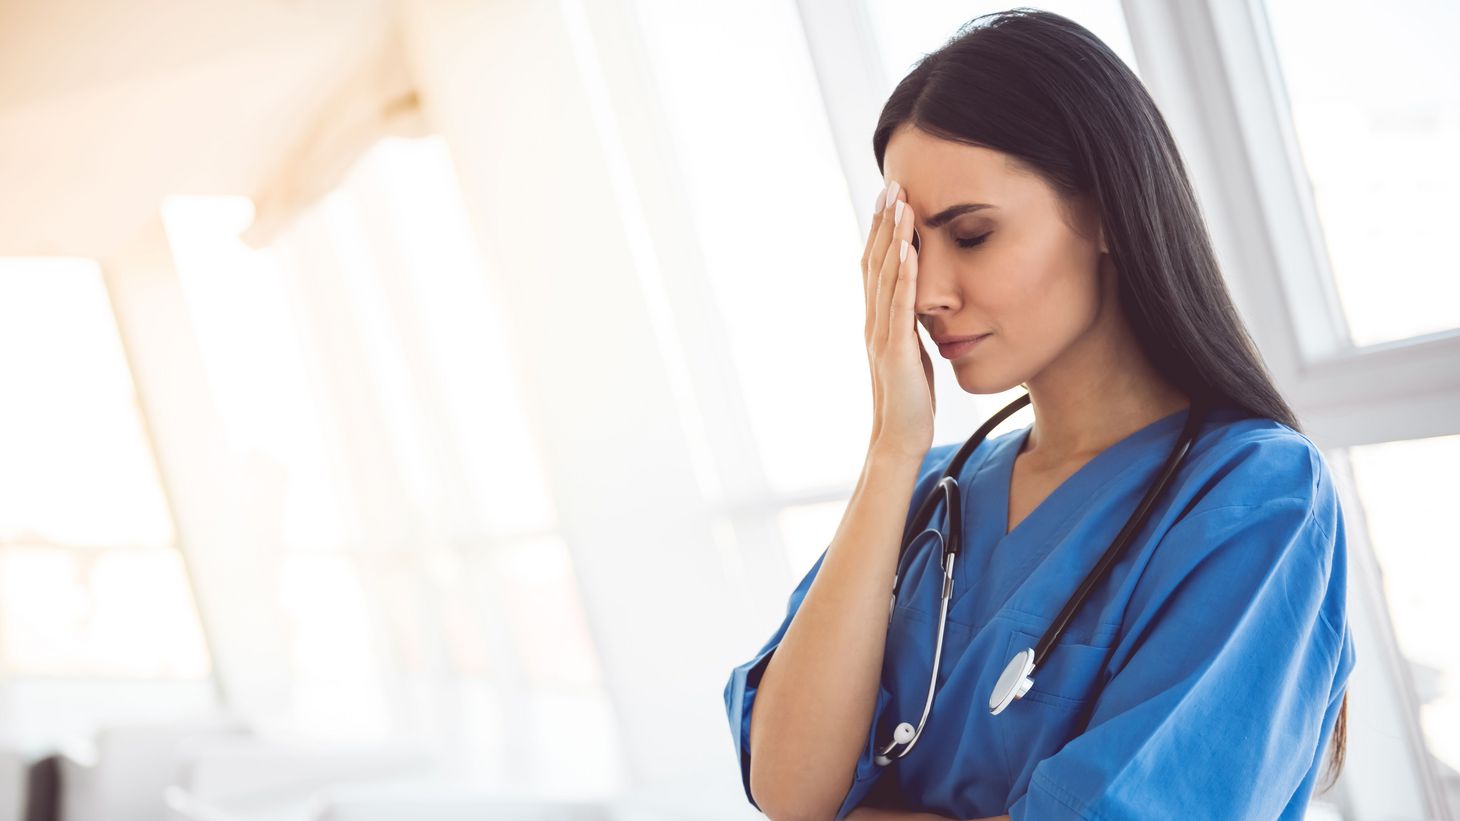 stressed nurse with hand on forehead